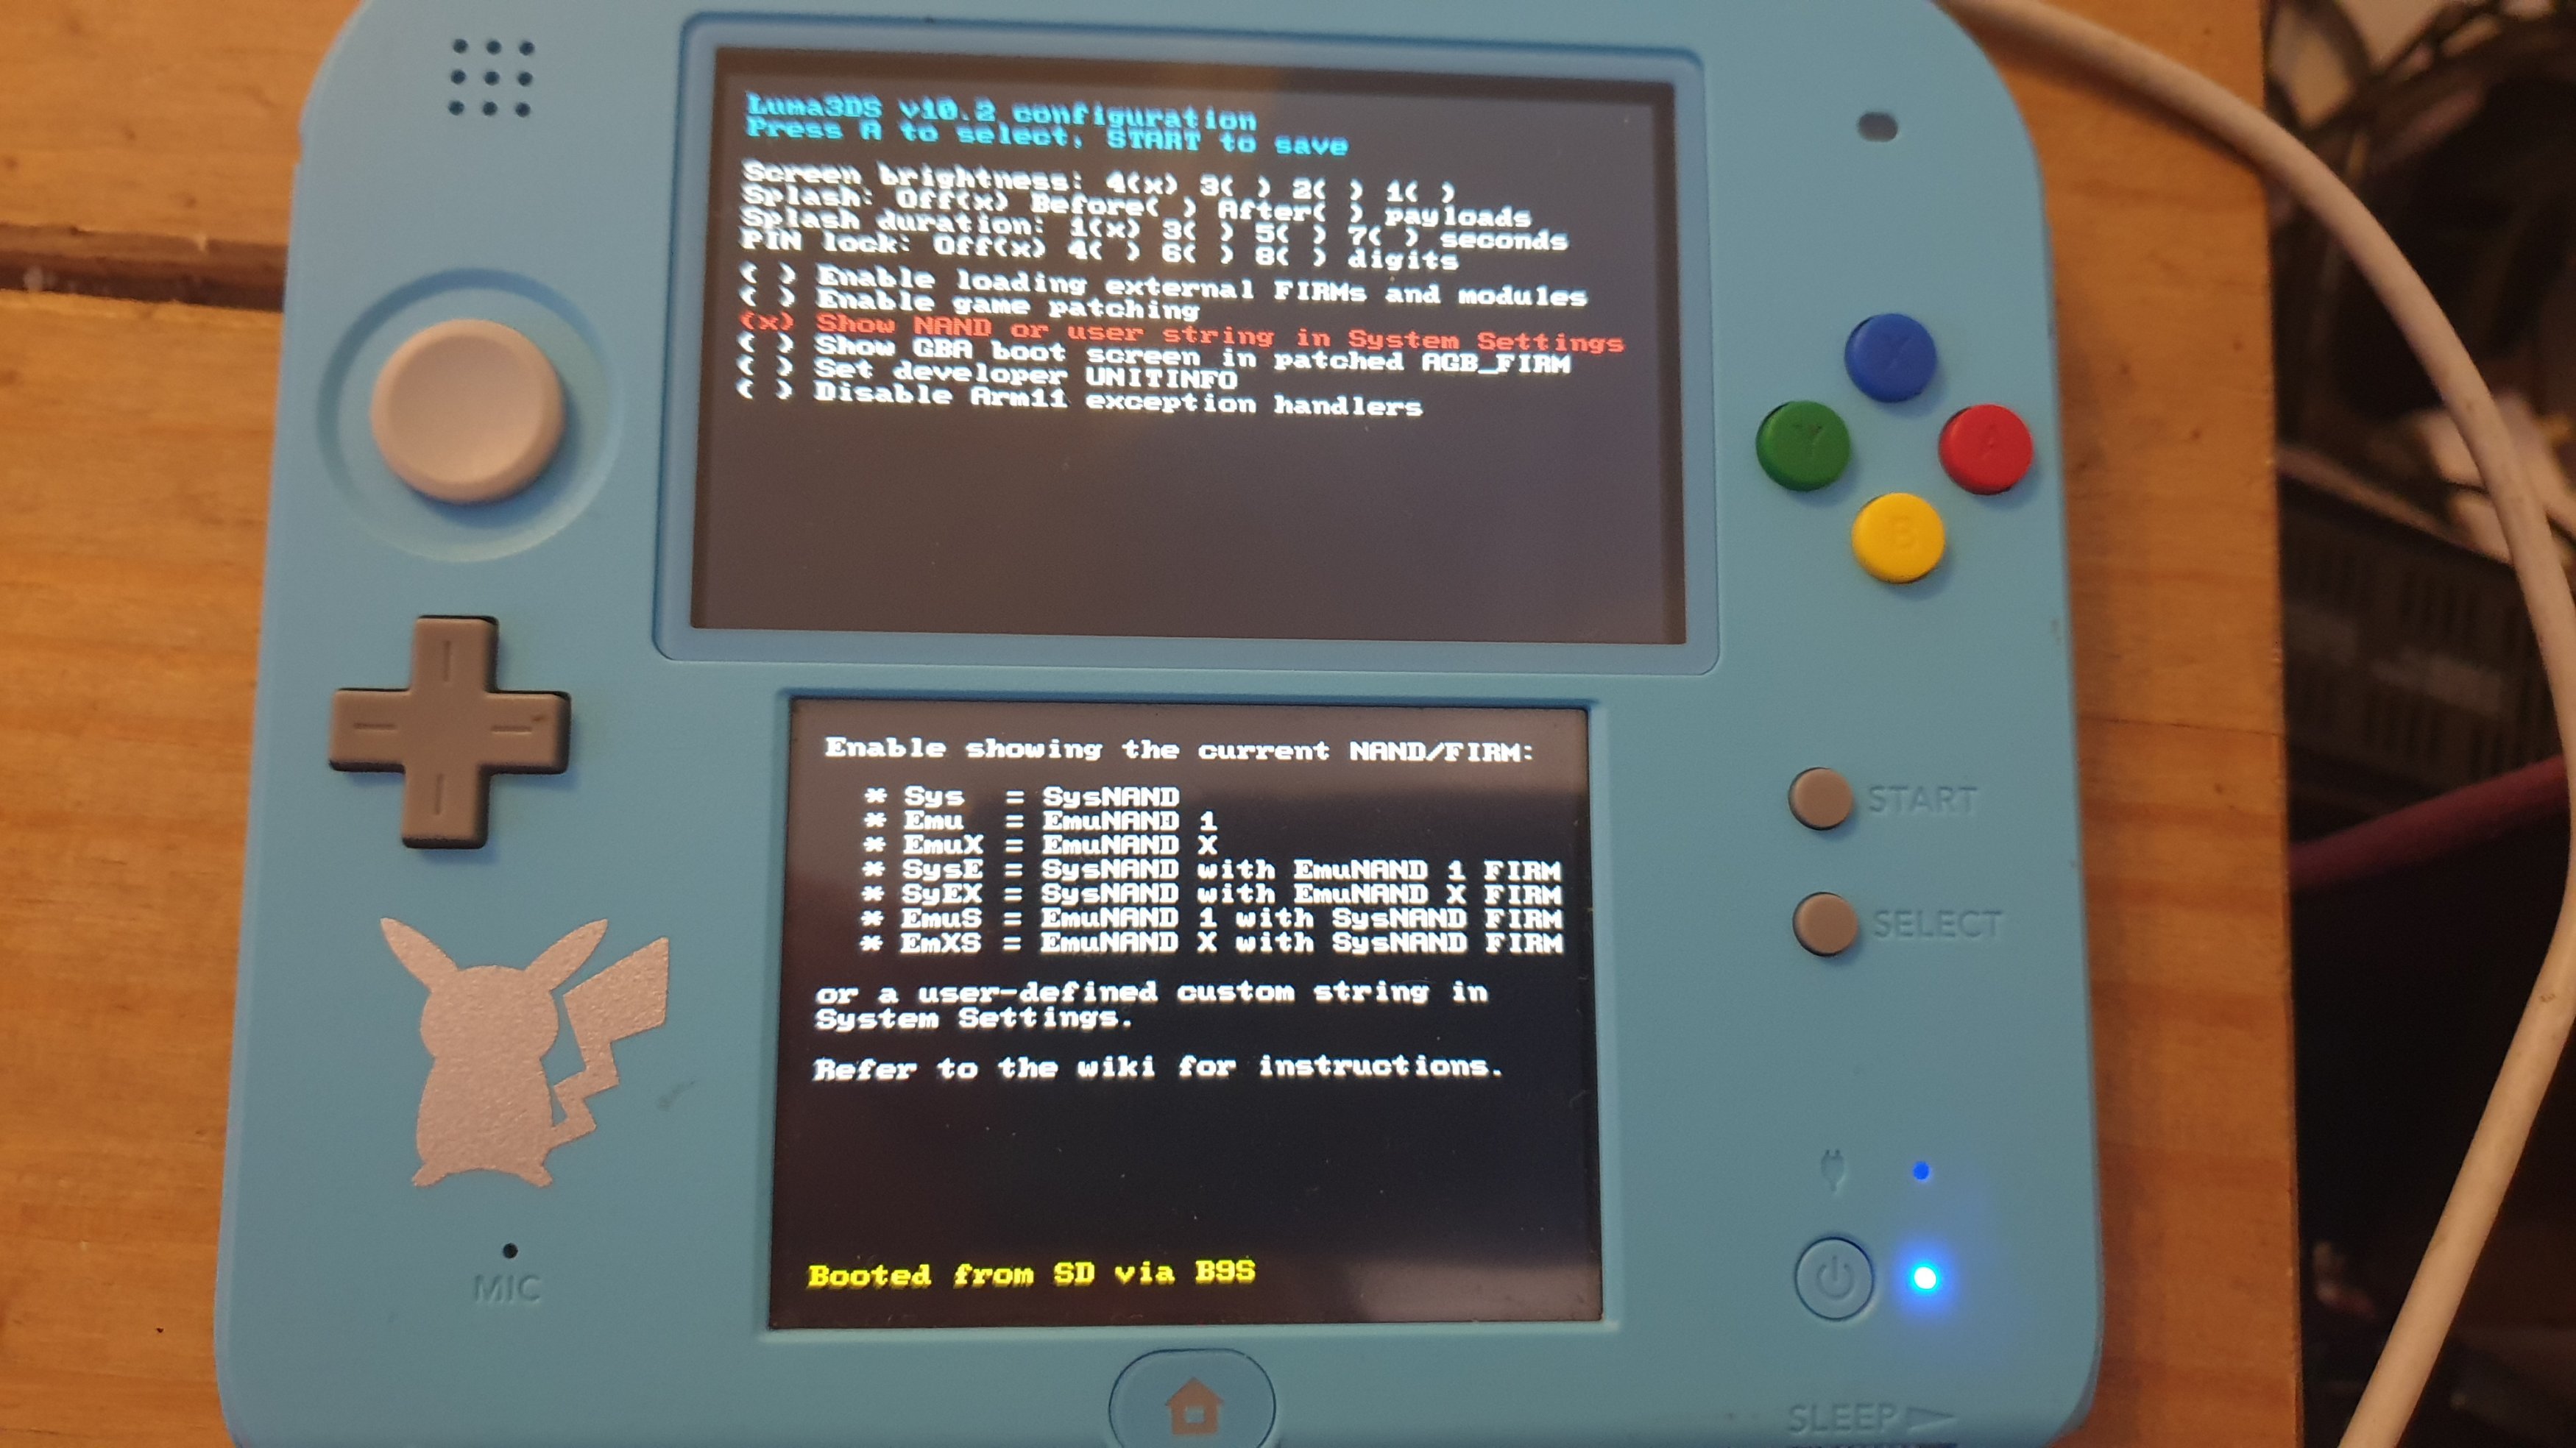 Bricked my 2ds using browserhax, can I reset and start again? | GBAtemp.net  - The Independent Video Game Community